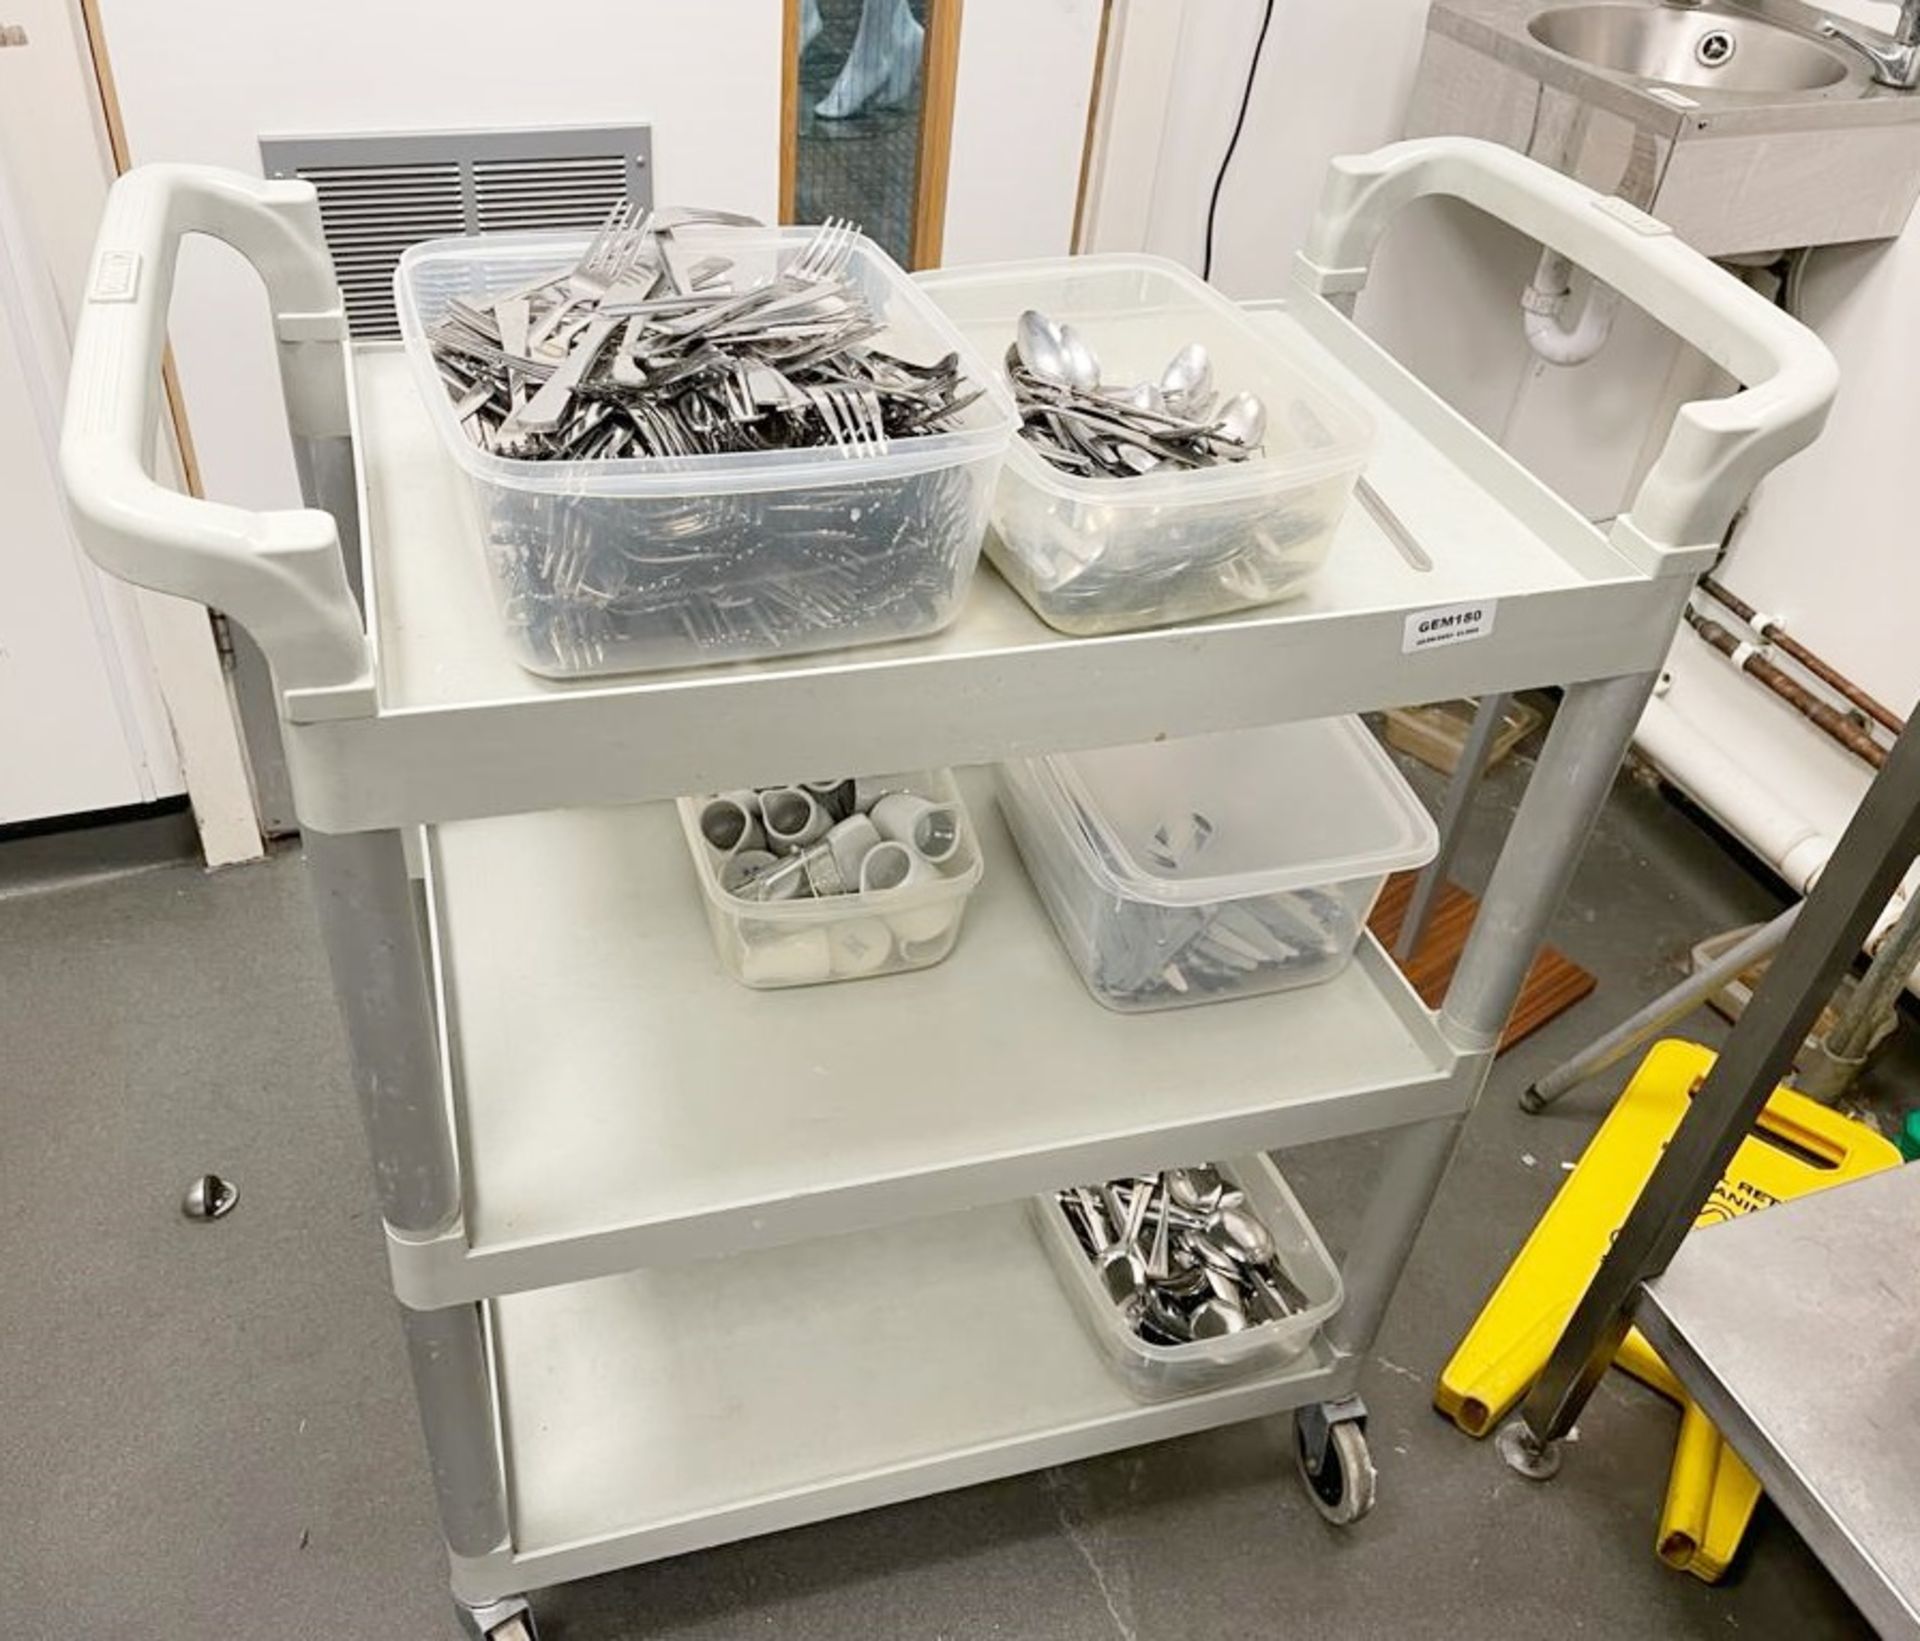 1 x Service Trolley With Push/Pull Handles on Castors - Includes Contents Such as Knives, Forks, - Image 5 of 7